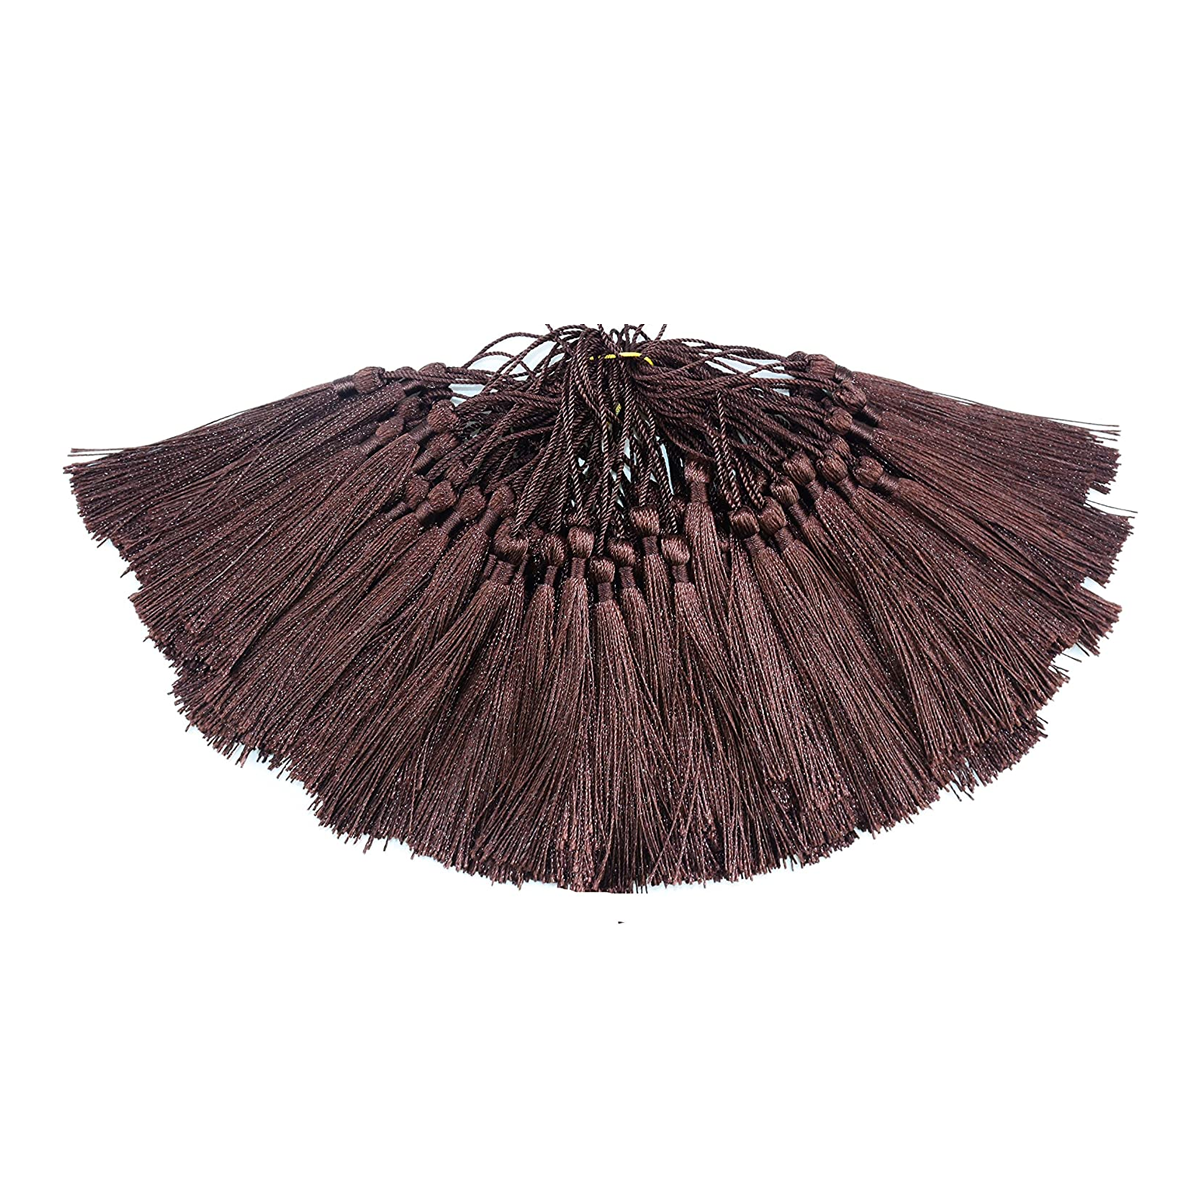 96 PCS Brown Soft Craft Tassels with Loops for Jewelry Making, DIY, Bookmark, - WILLOW